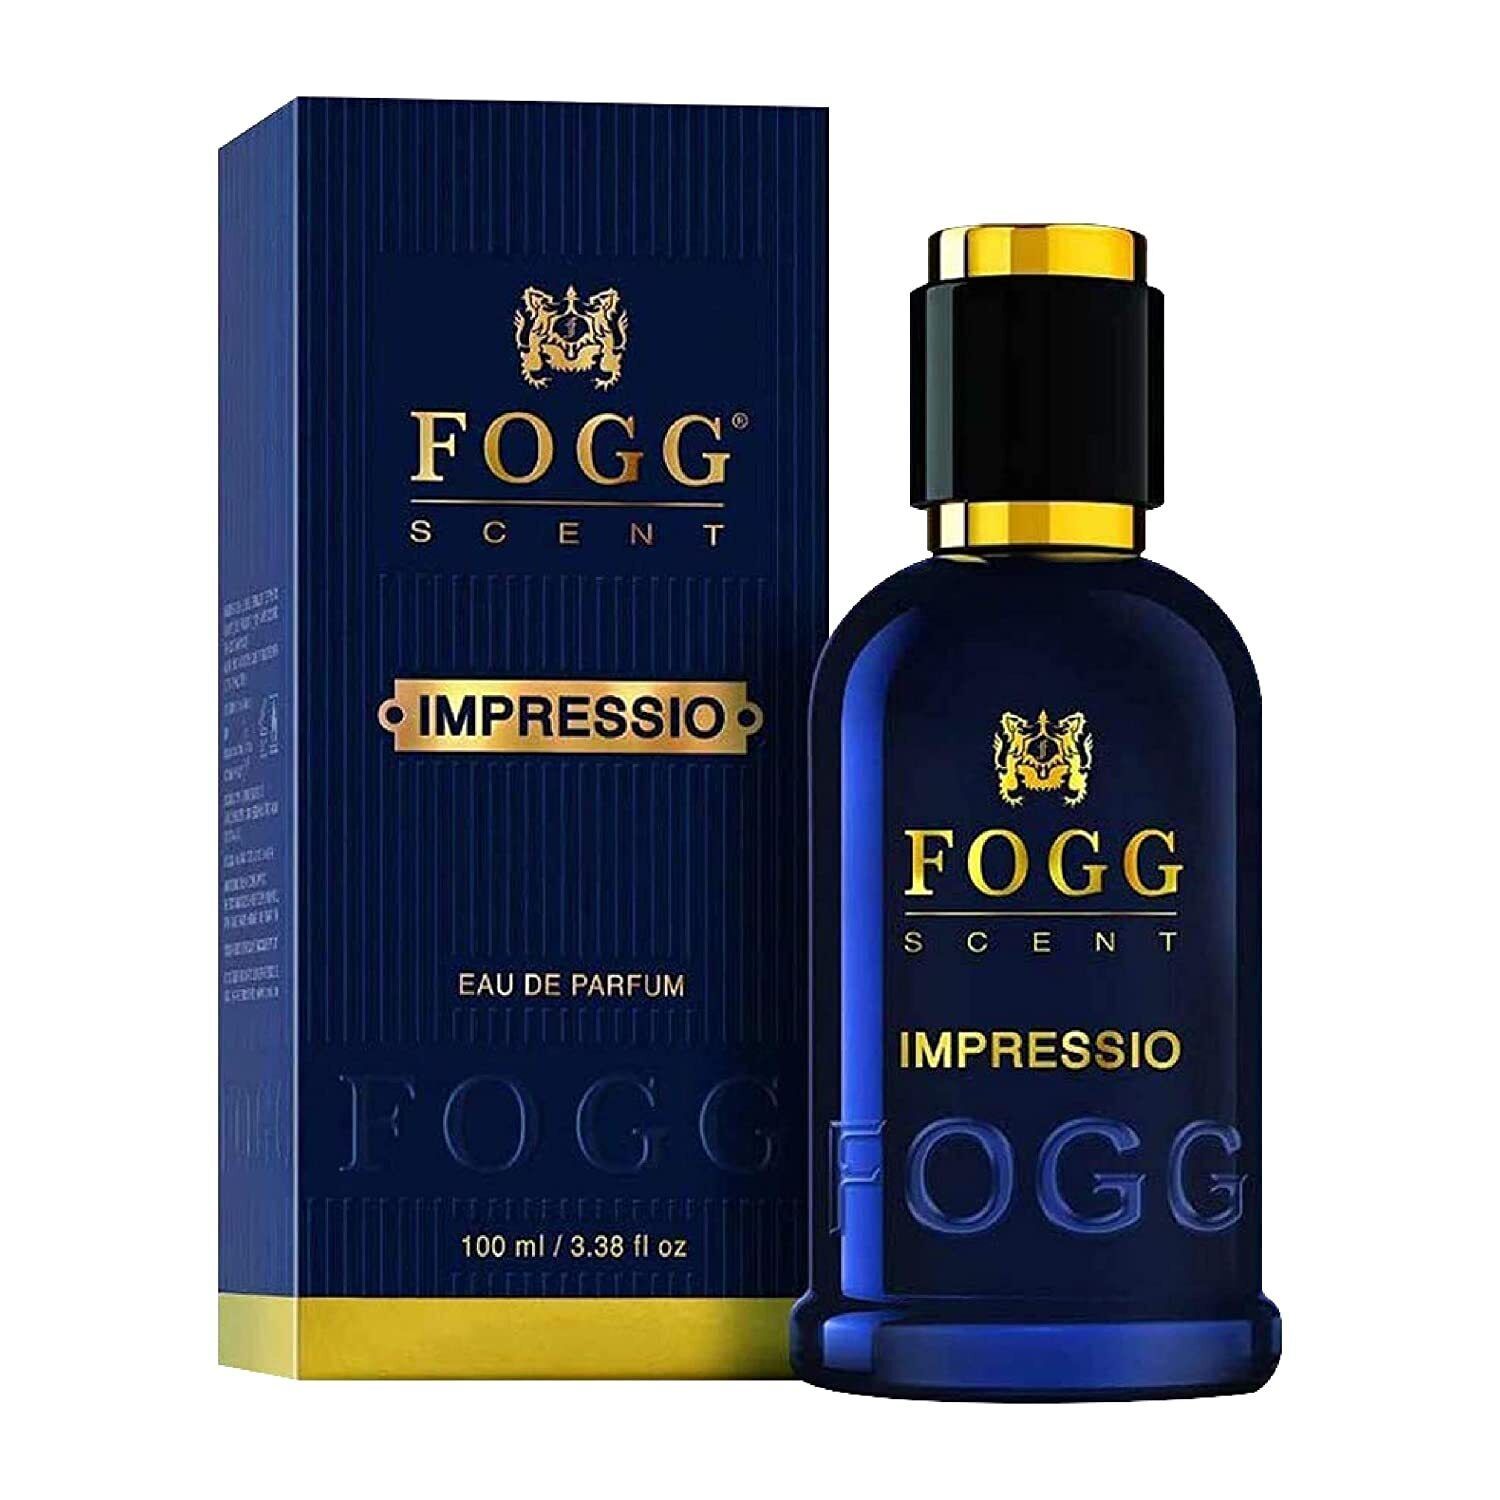 Primary image for Fogg Long-Lasting Fresh & Soothing Fragrance Impressio Scent For Men, EDP